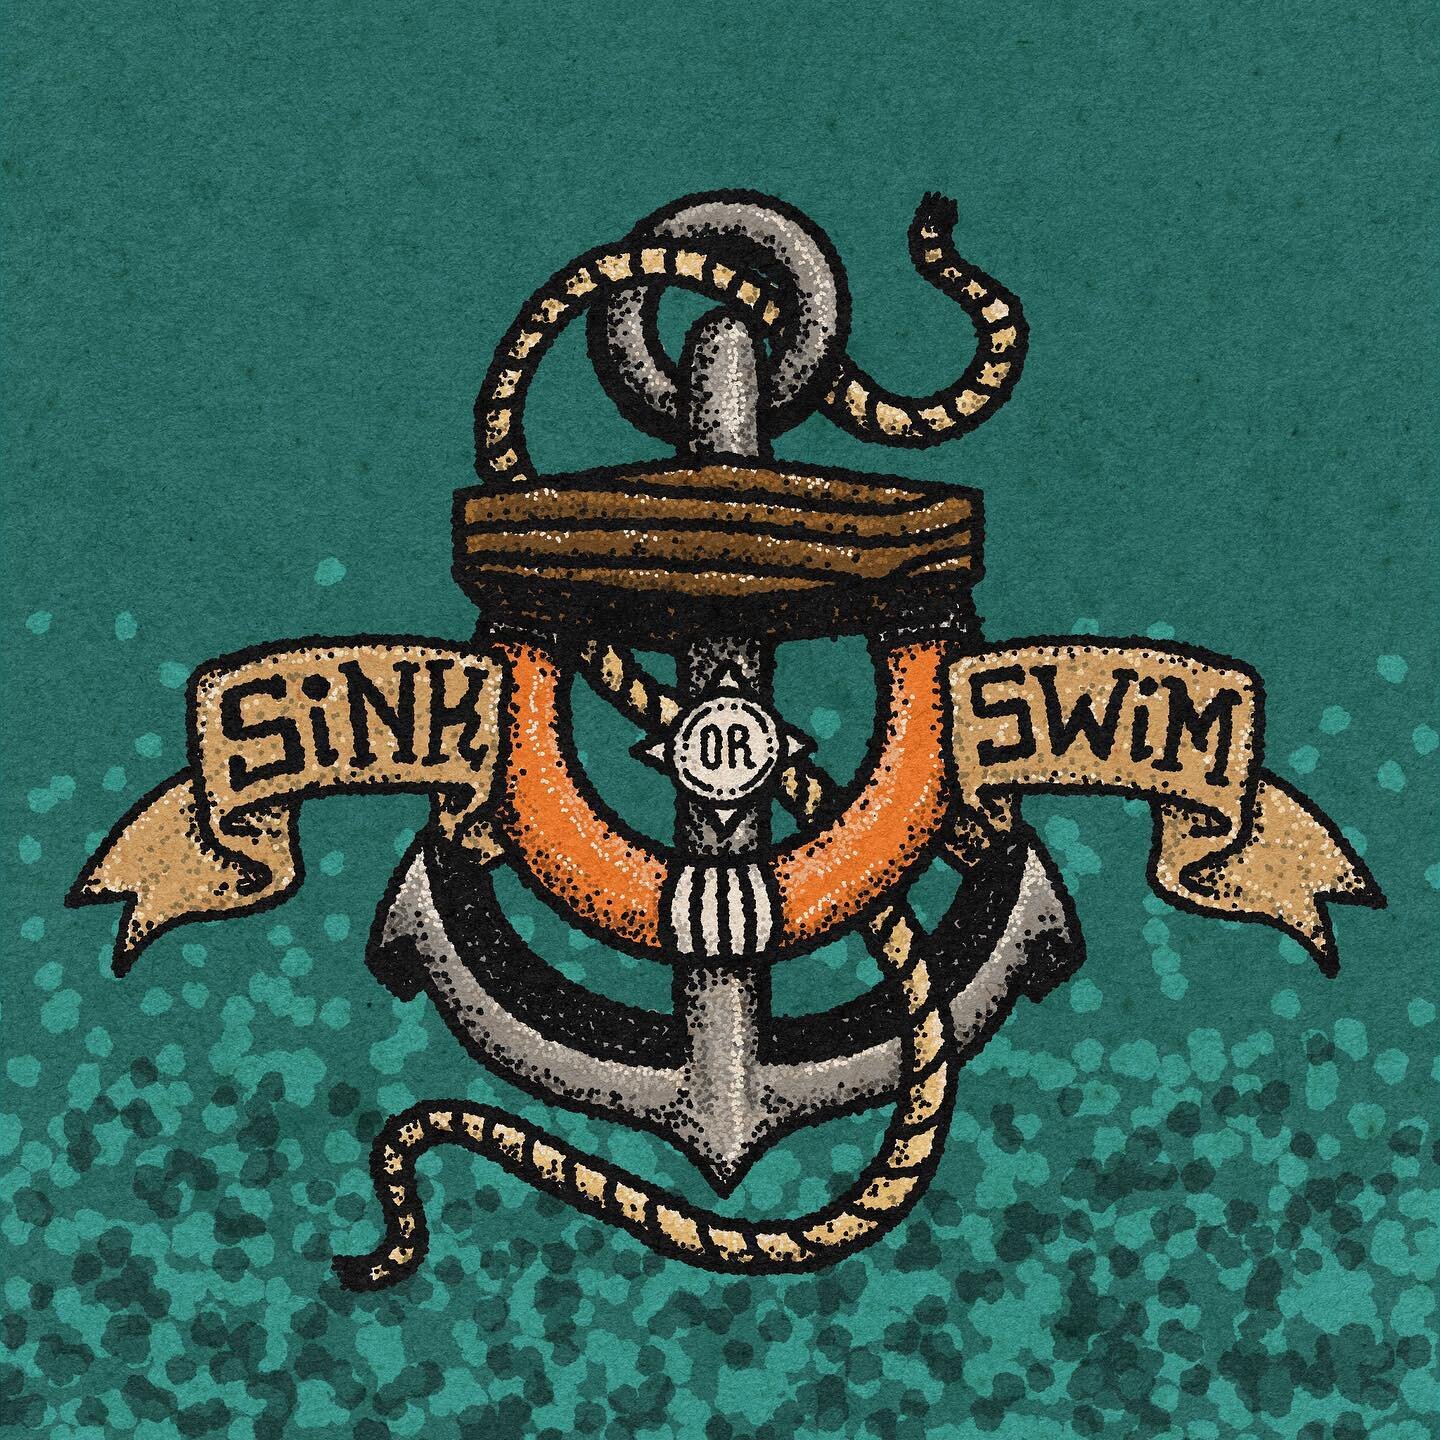 Swimming has been working well so far. I am gonna stick with it. Hope y&rsquo;all are staying afloat too. 

#boise #idaho #halfbasquejob #sinkorswim #anchor #rope #illustration #lifepreserver #digitalart #procreate #stipple #boiseartist #graphicdesig